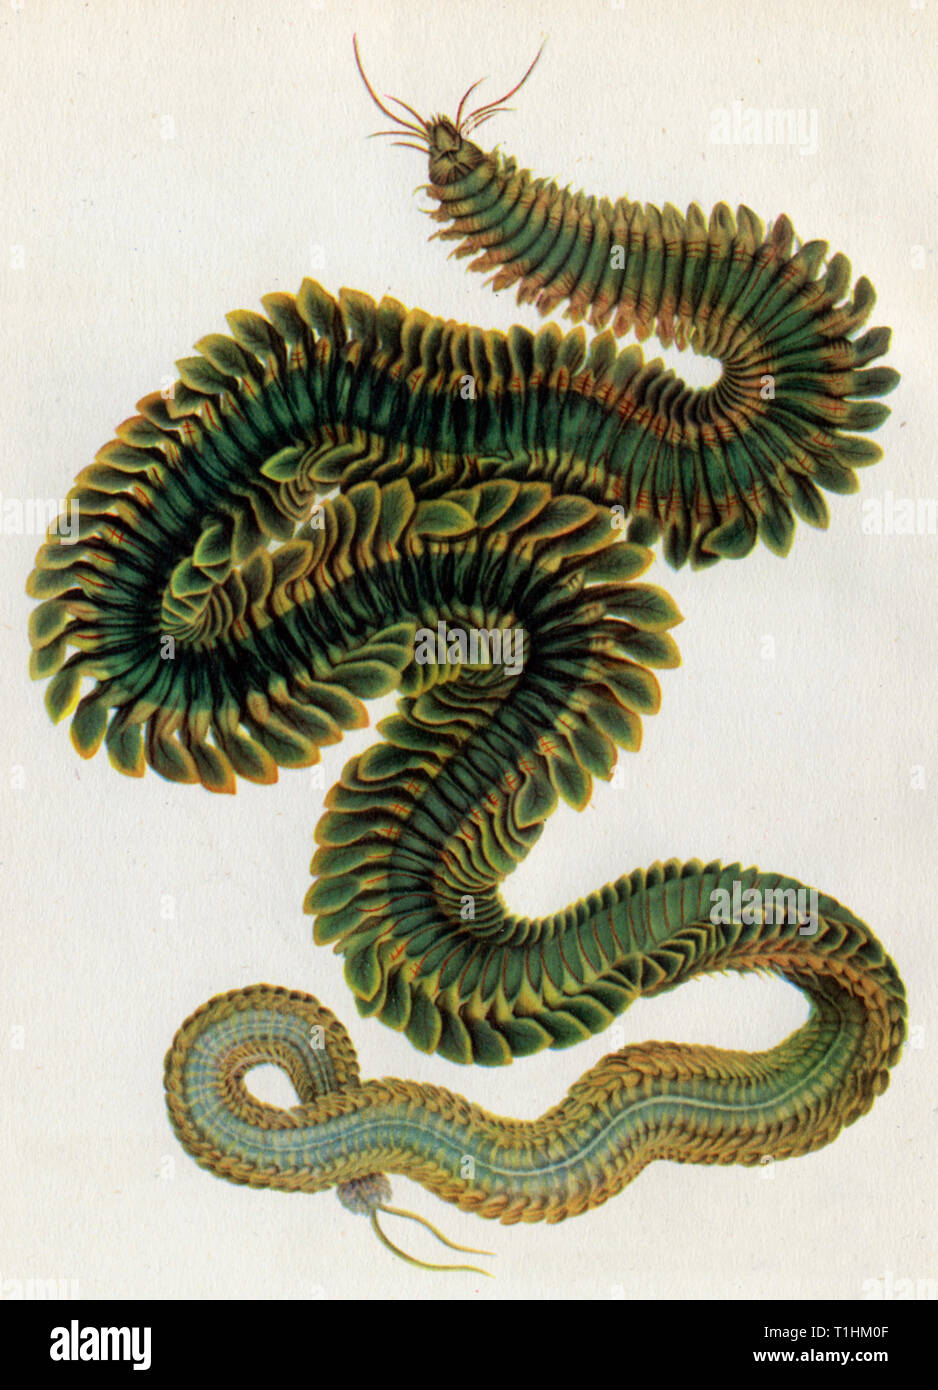 'Rag Worm: Nereis Virens' (Neanthes Virens). Coloured engraving from W. C. McIntosh's 'A Monograph of The British Marine Annelids', Ray Society, 1908-1910. Stock Photo